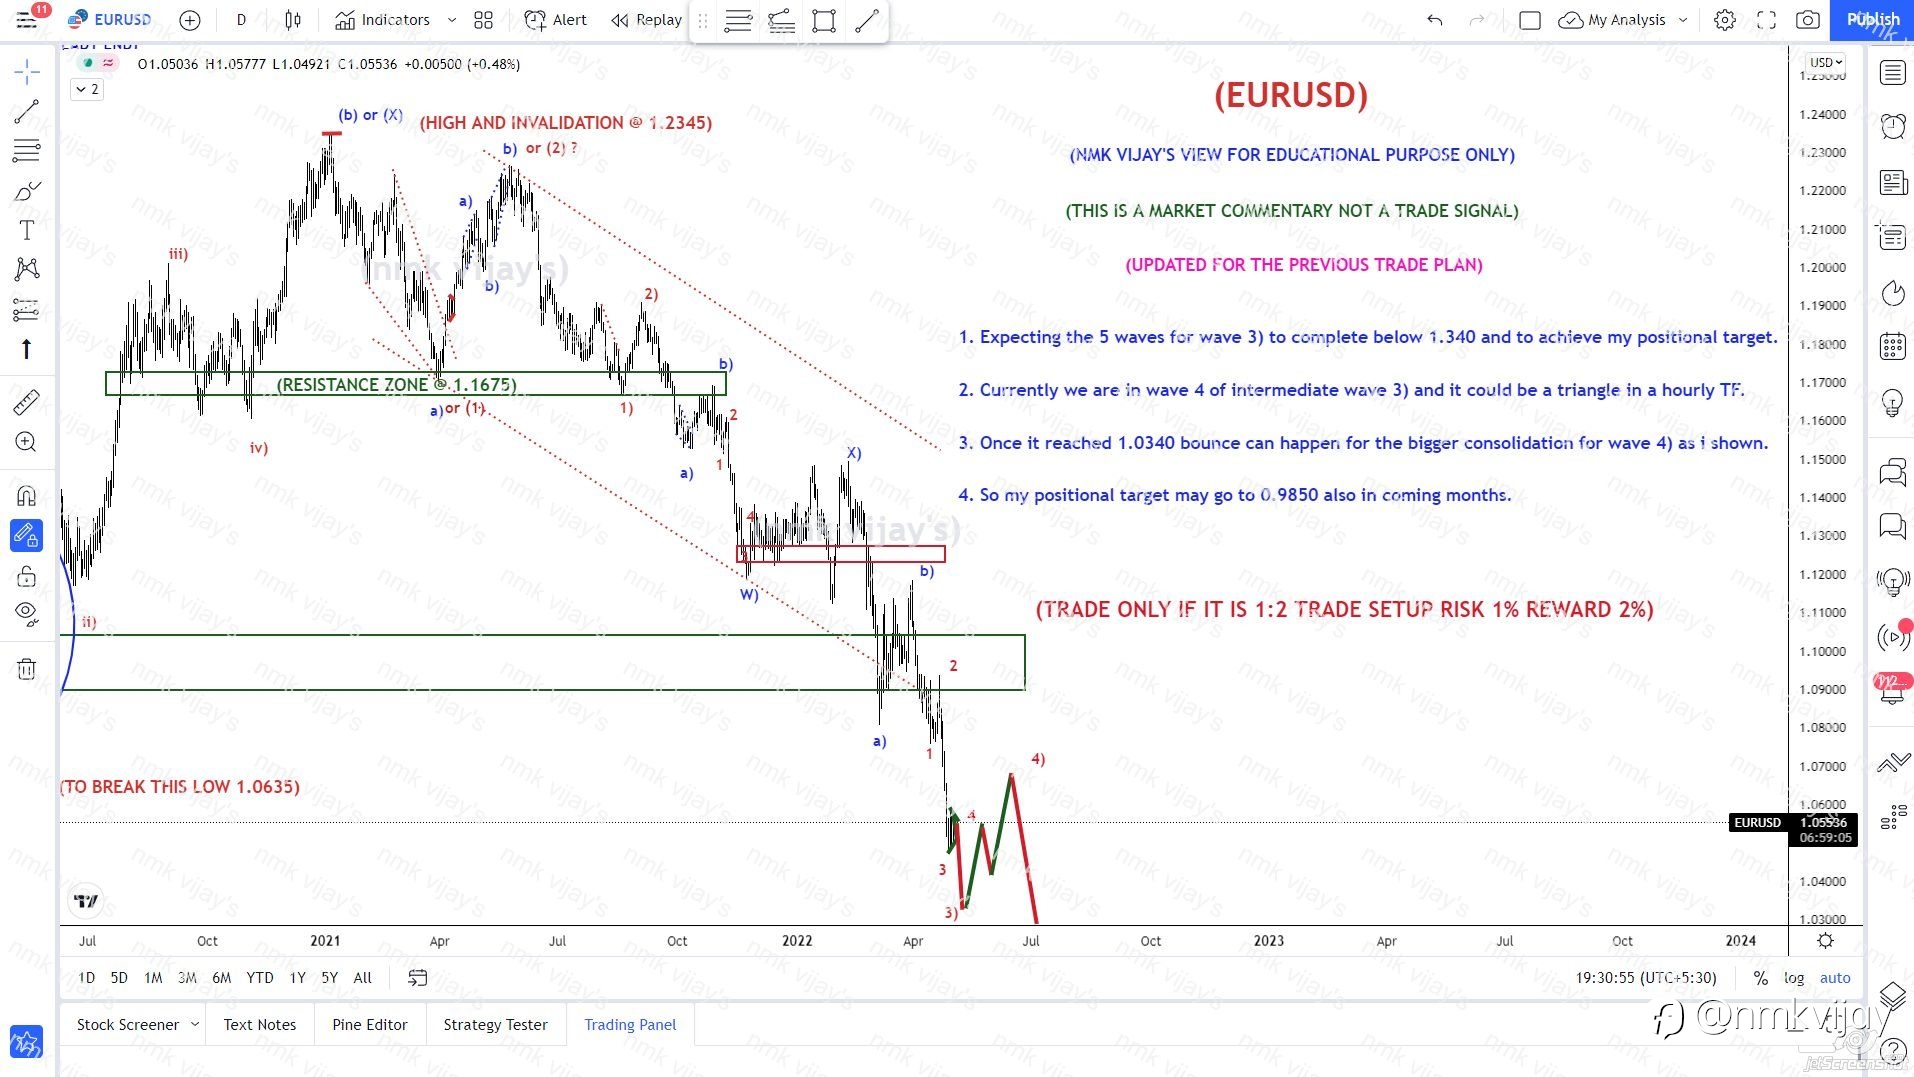 EURUSD-Looking for a Triangle in wave 4 and then to break 1.0340